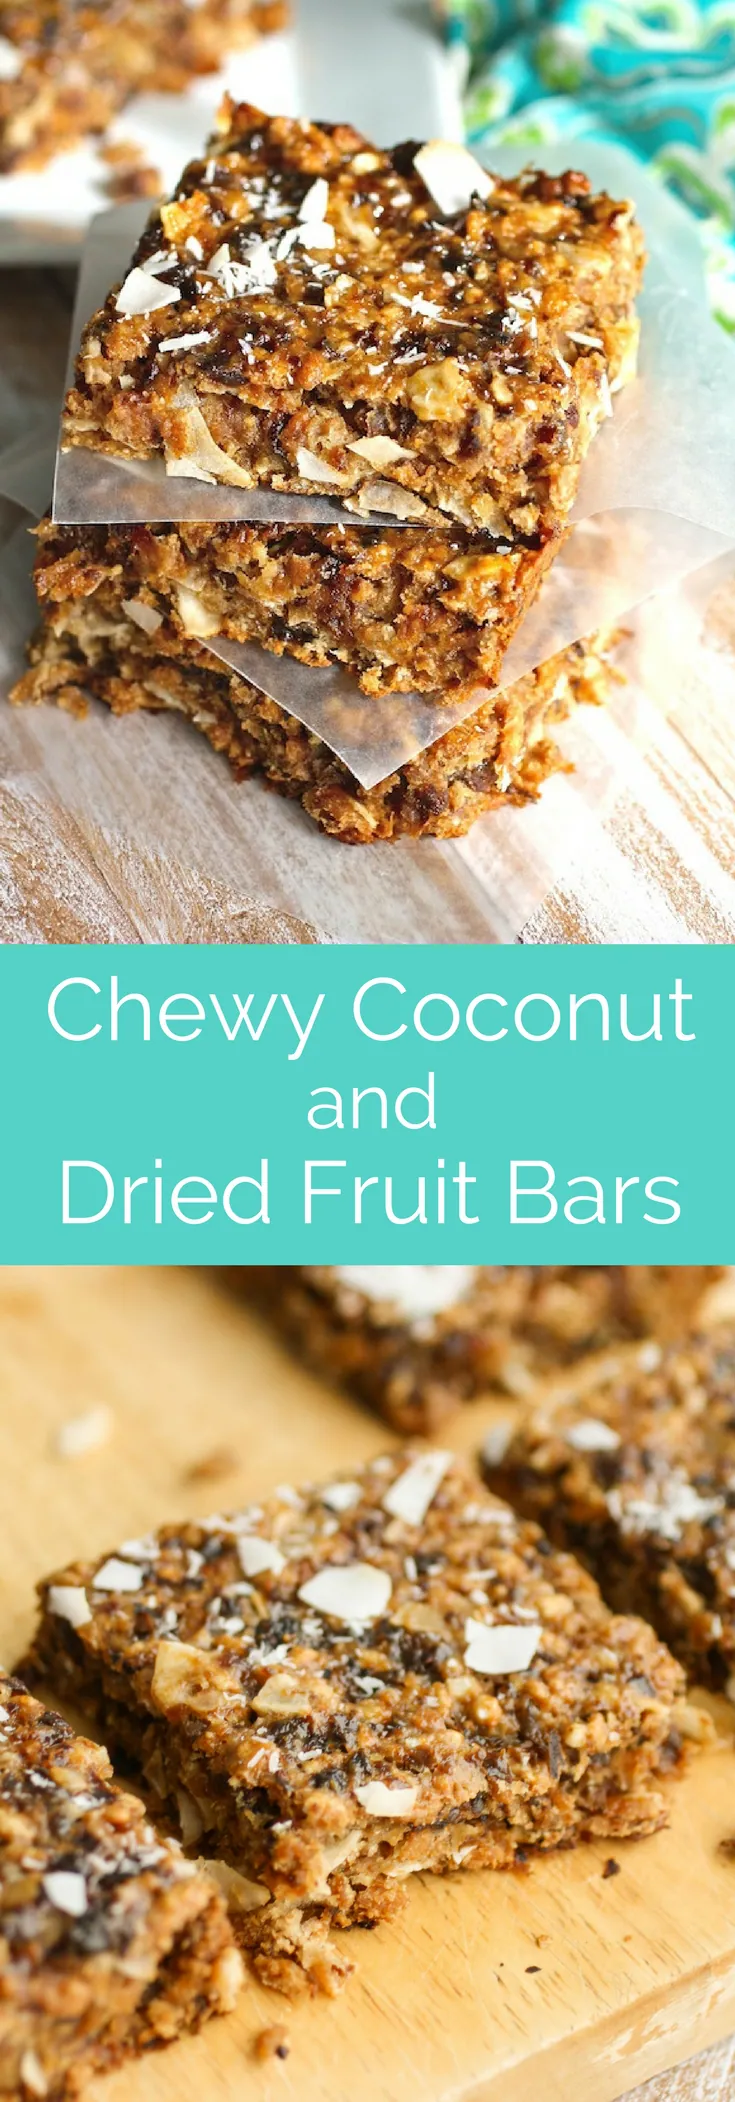 Chewy Coconut and Dried Fruit Bars are sweet and delightful! These chewy bars have a healthy vibe for a snack or dessert.